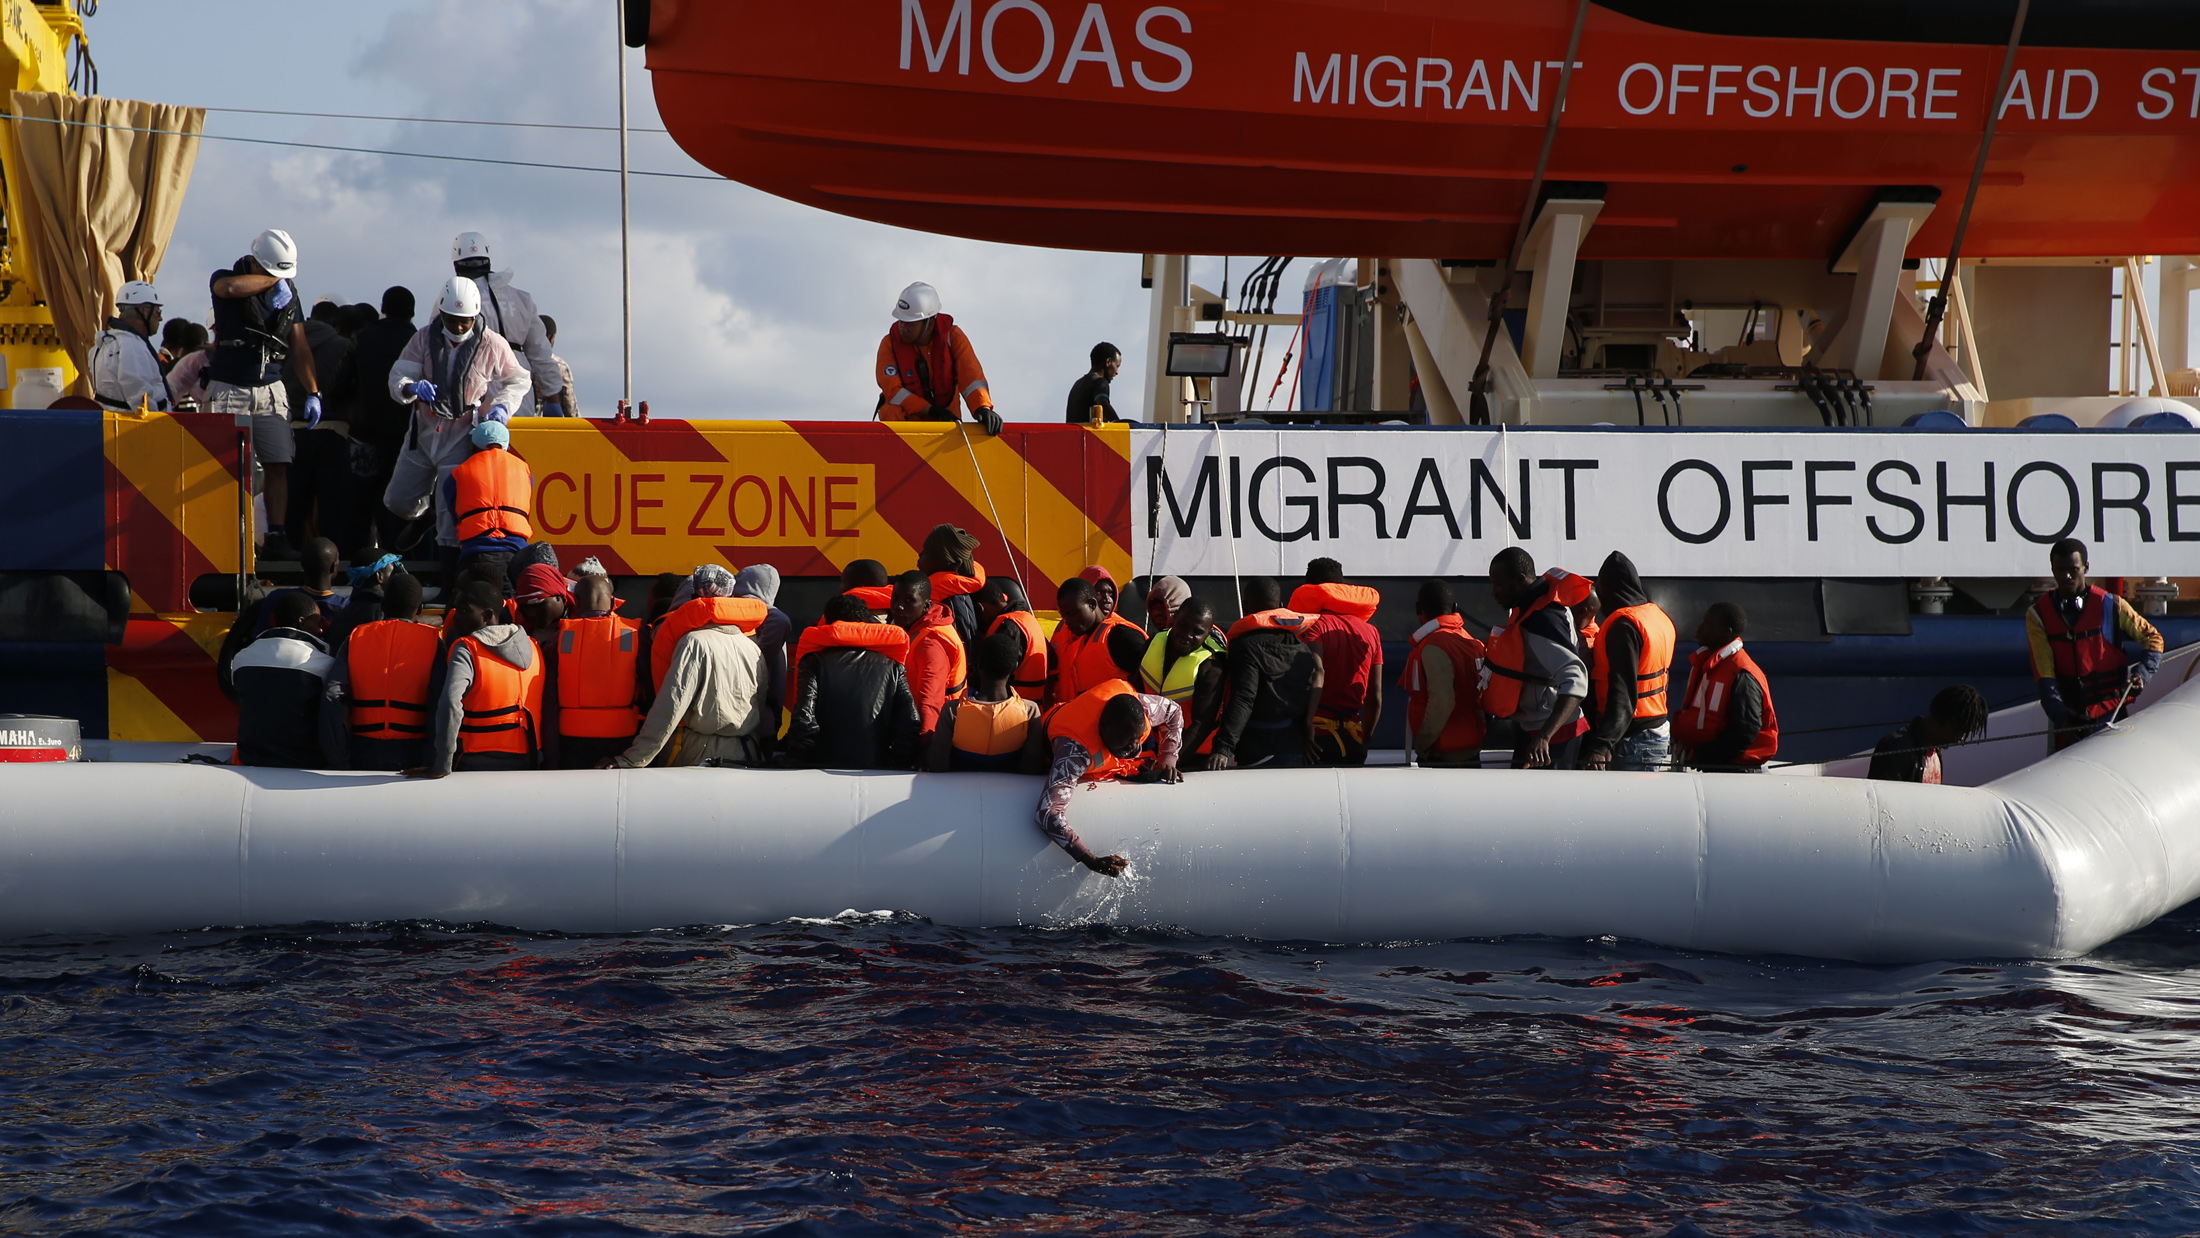 Migrants in a dinghy await rescue off the coast of Libya